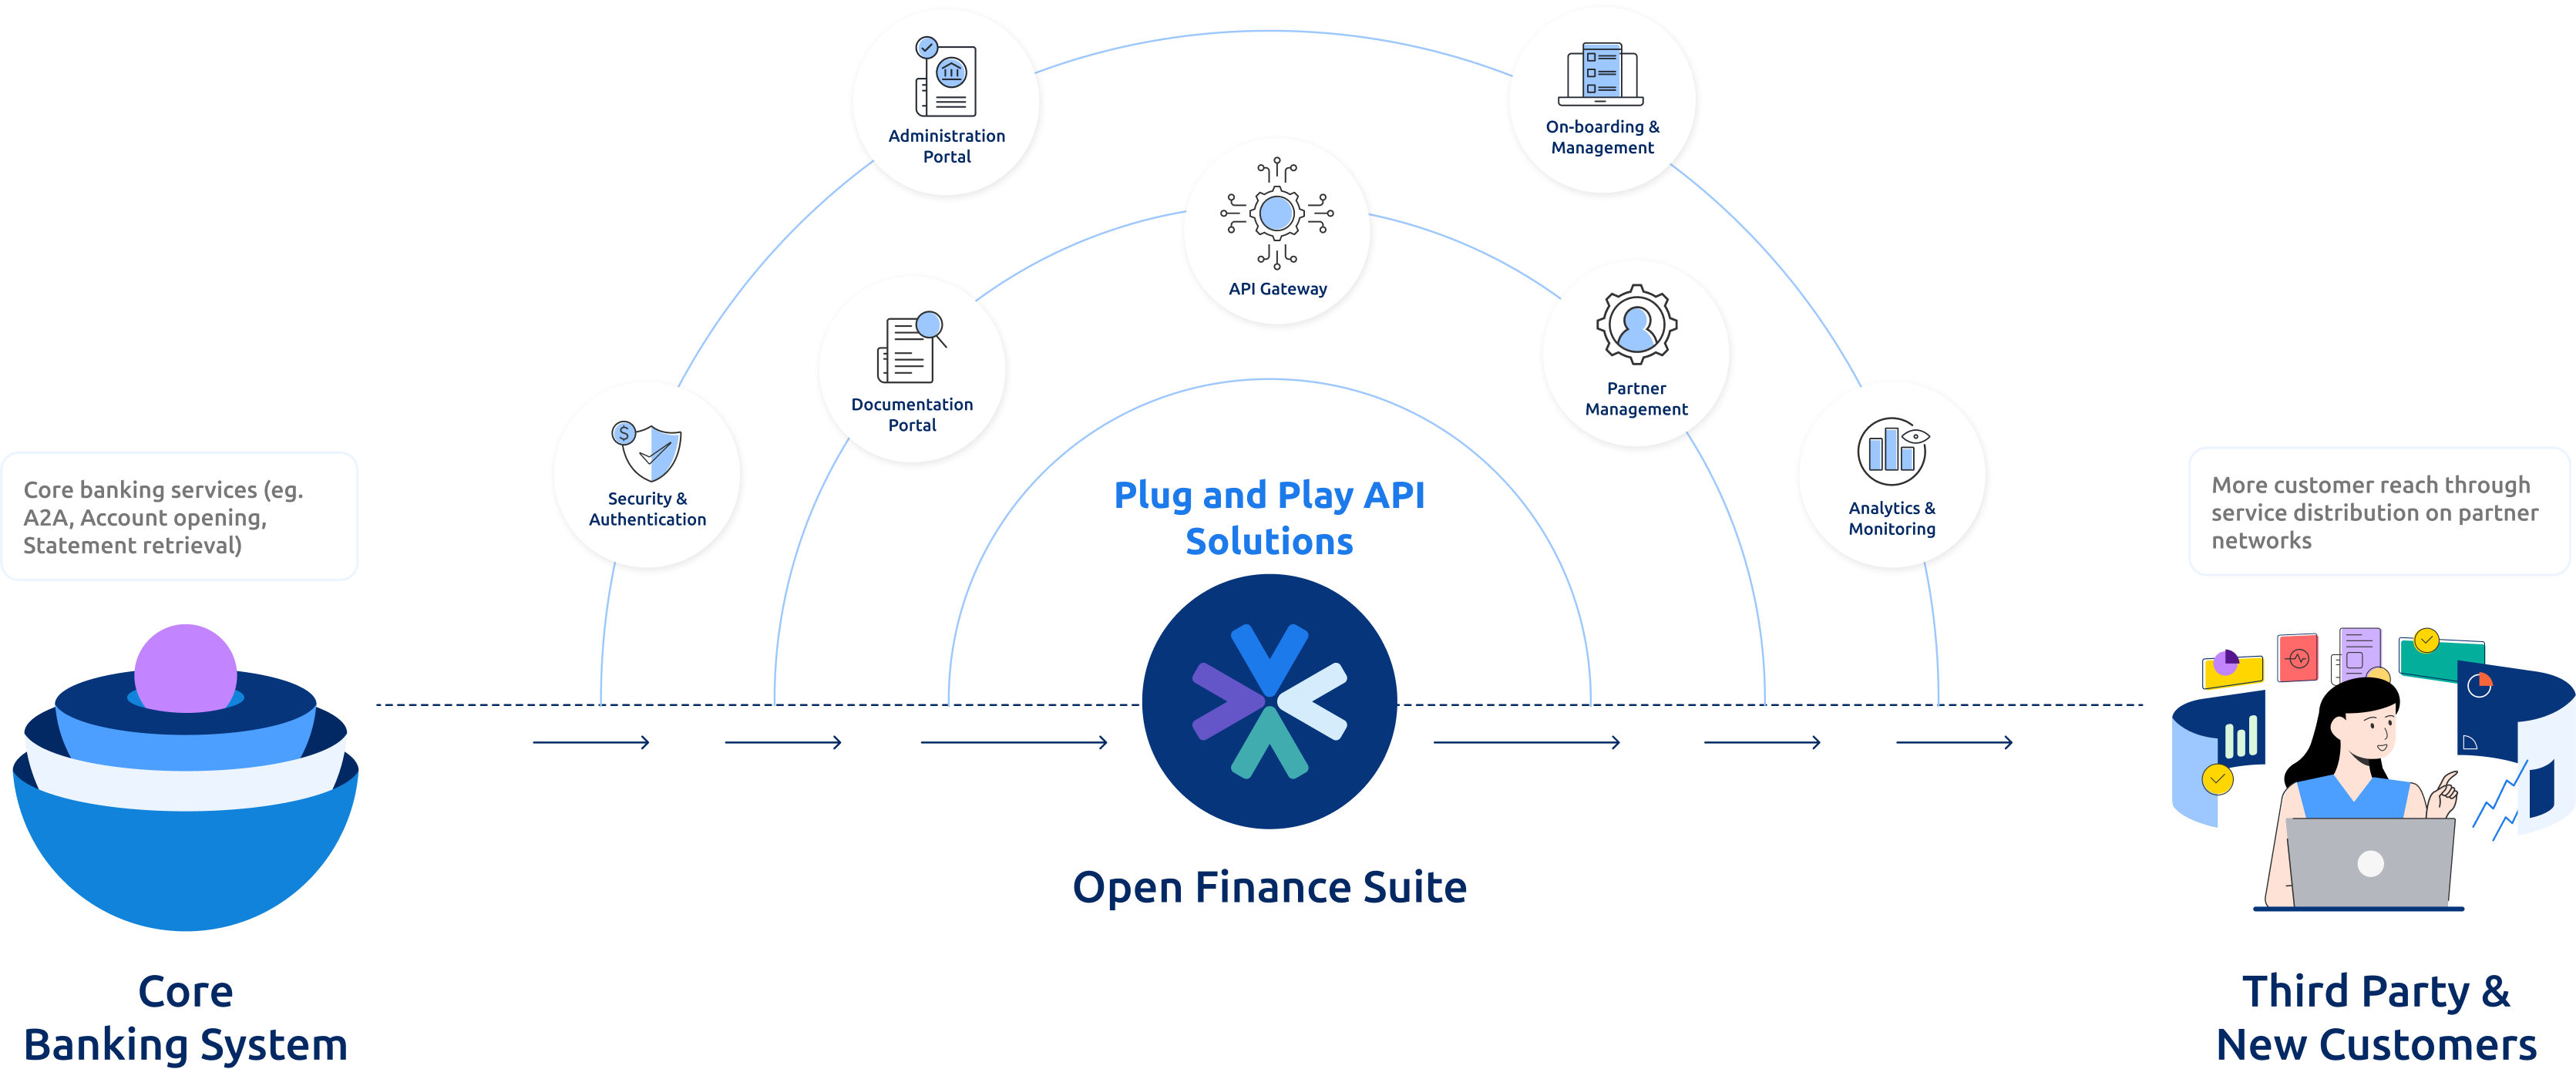 PERA HUB Launches its Digital Remittance Platform using the Brankas Open Finance Suite